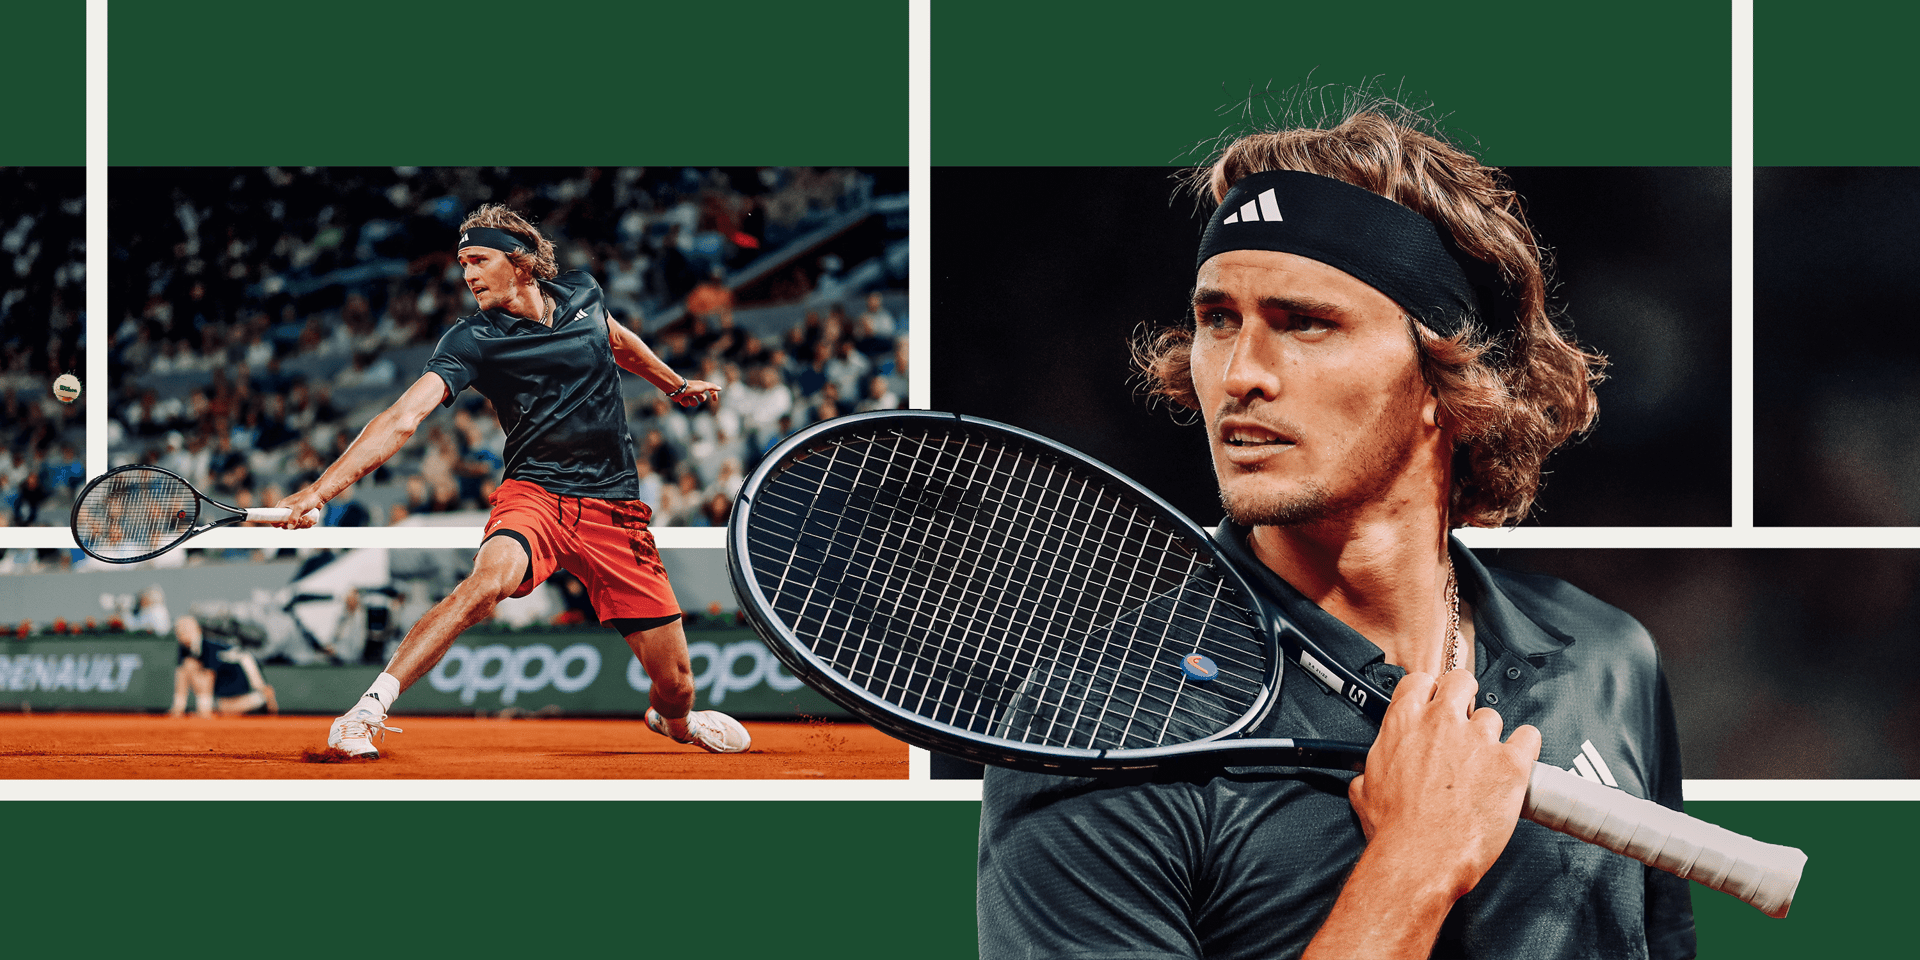 Alexander Zverev is a French Open favorite. He also awaits a domestic abuse hearing